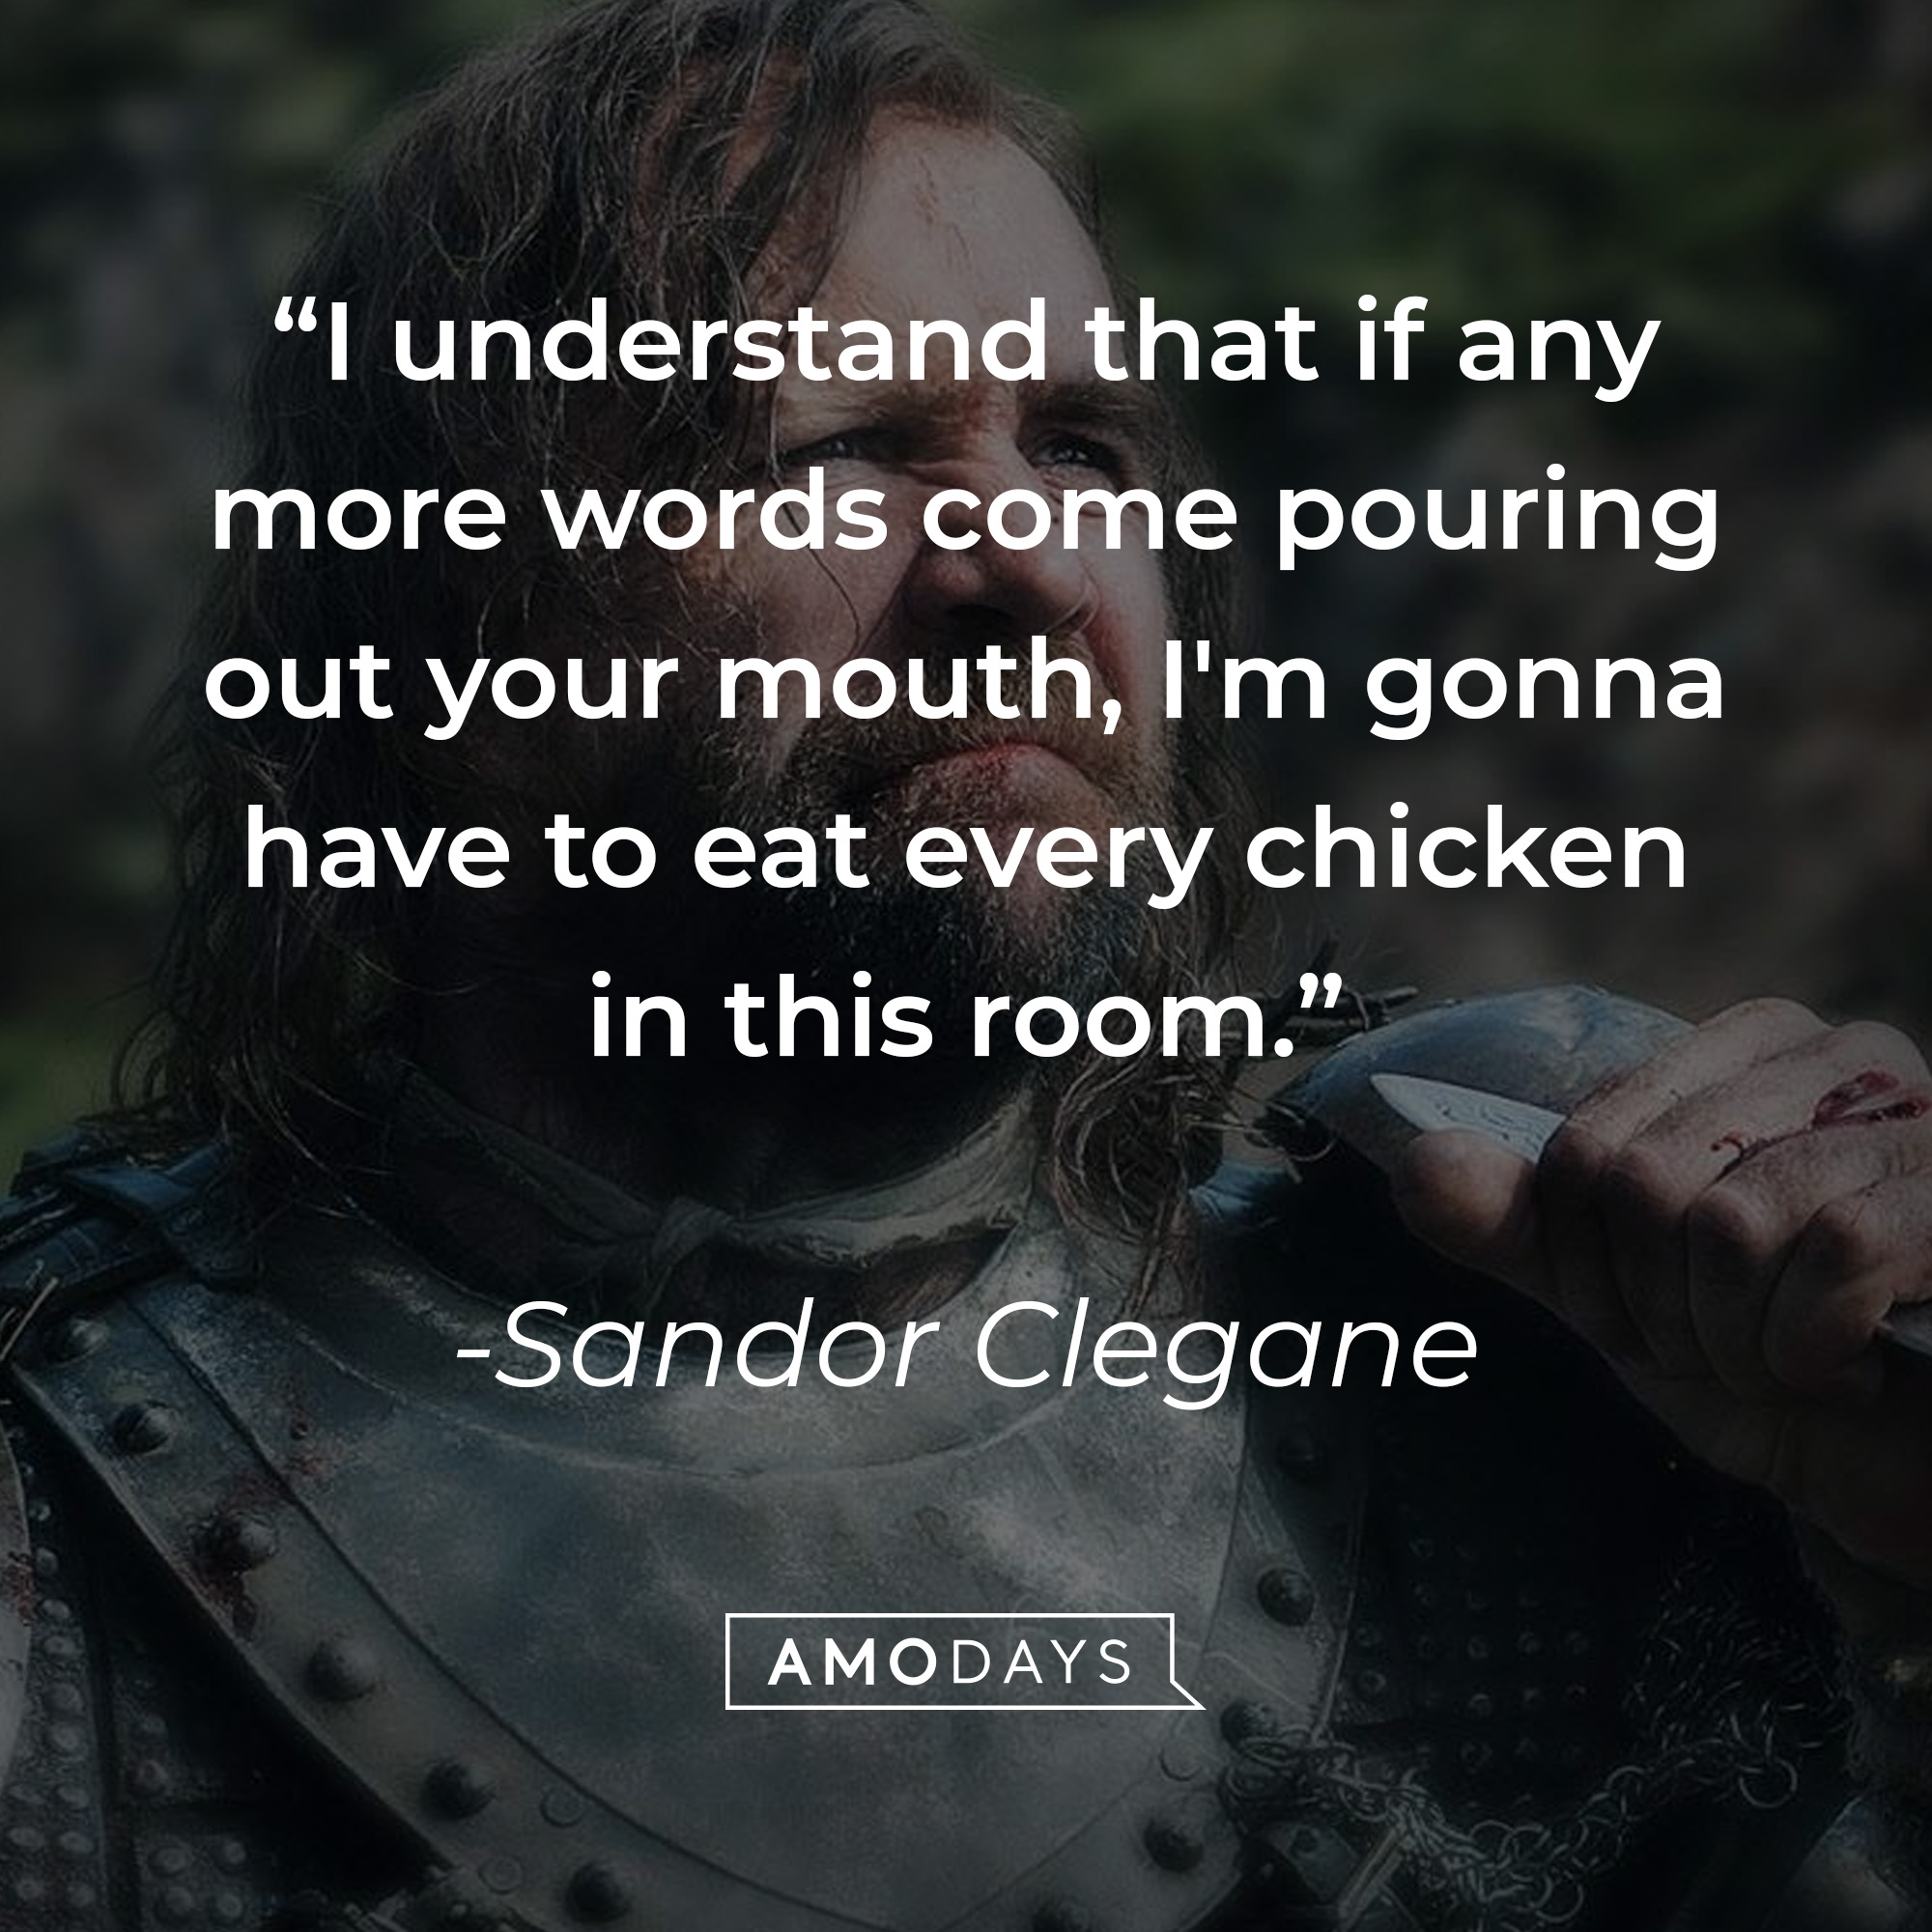 Sandor Clegane's quote: "I understand that if any more words come pouring out your mouth, I'm gonna have to eat every chicken in this room." | Source: facebook.com/GameOfThrones